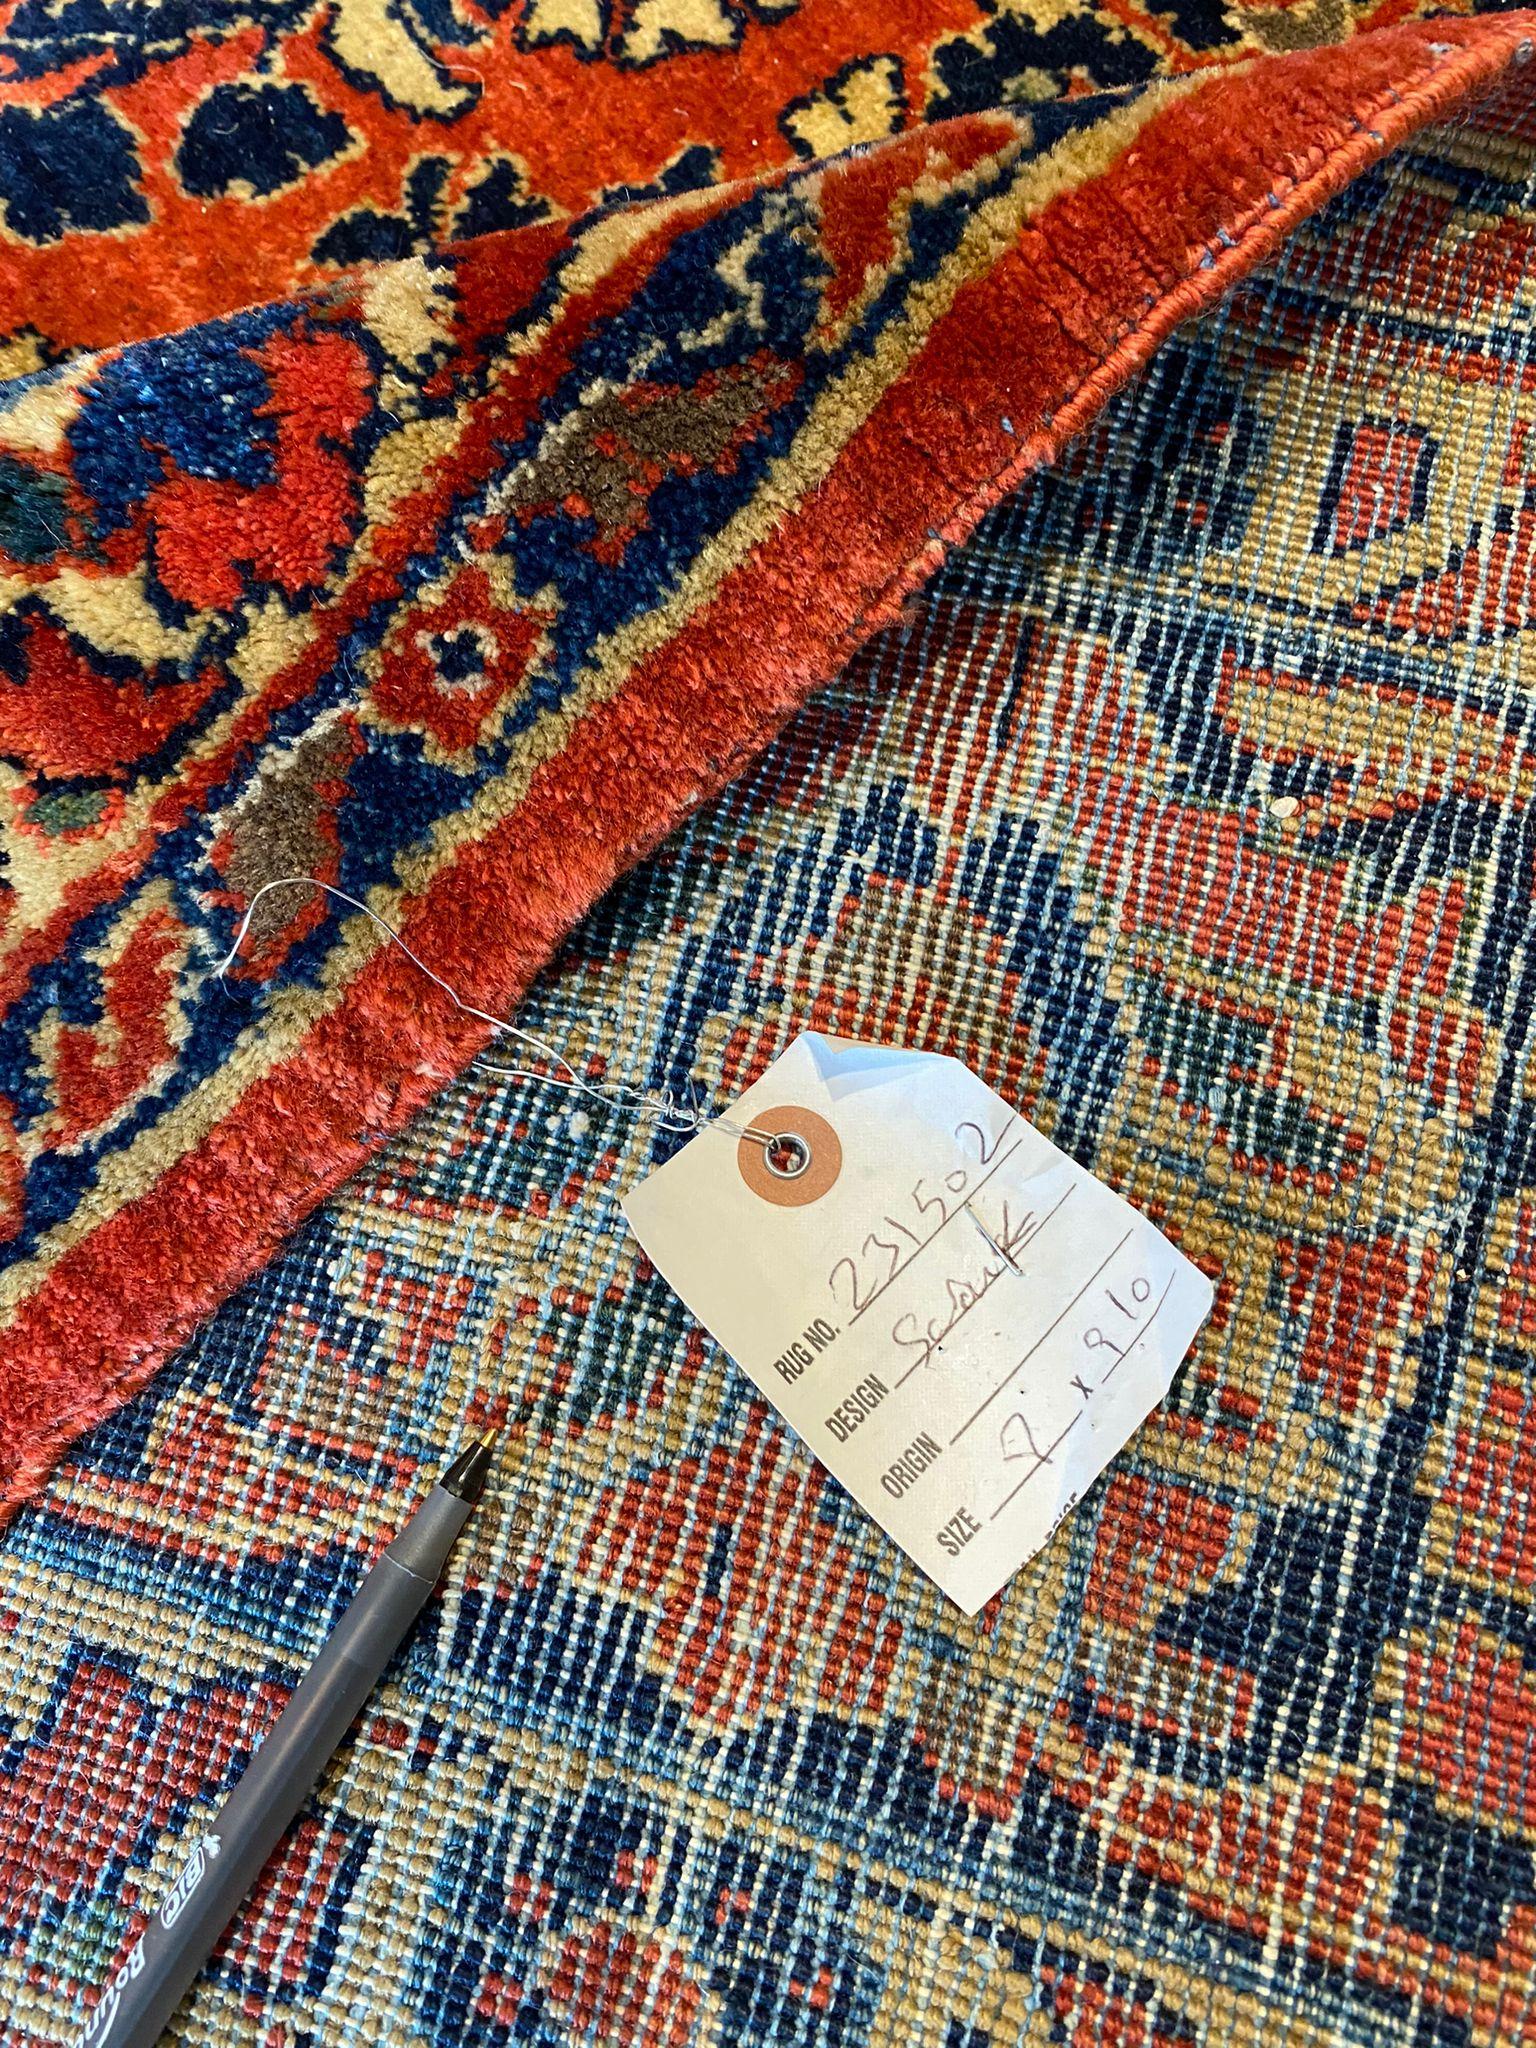 The Vintage Sarouk Rug, with its size measuring 8'1